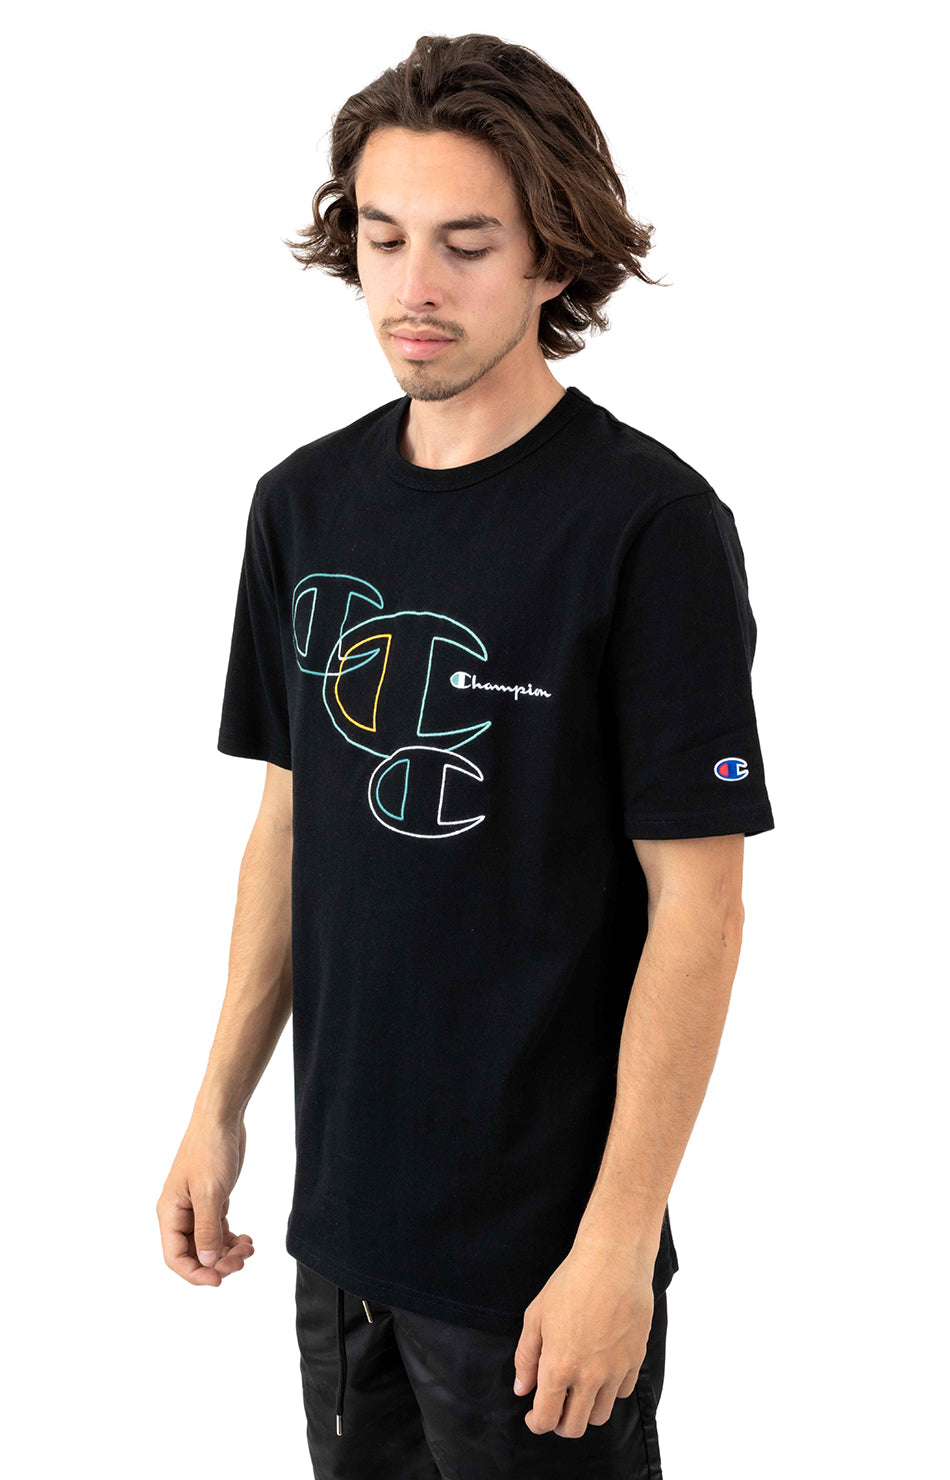 Heritage Embroidered "C" Outlines T-Shirt - Black